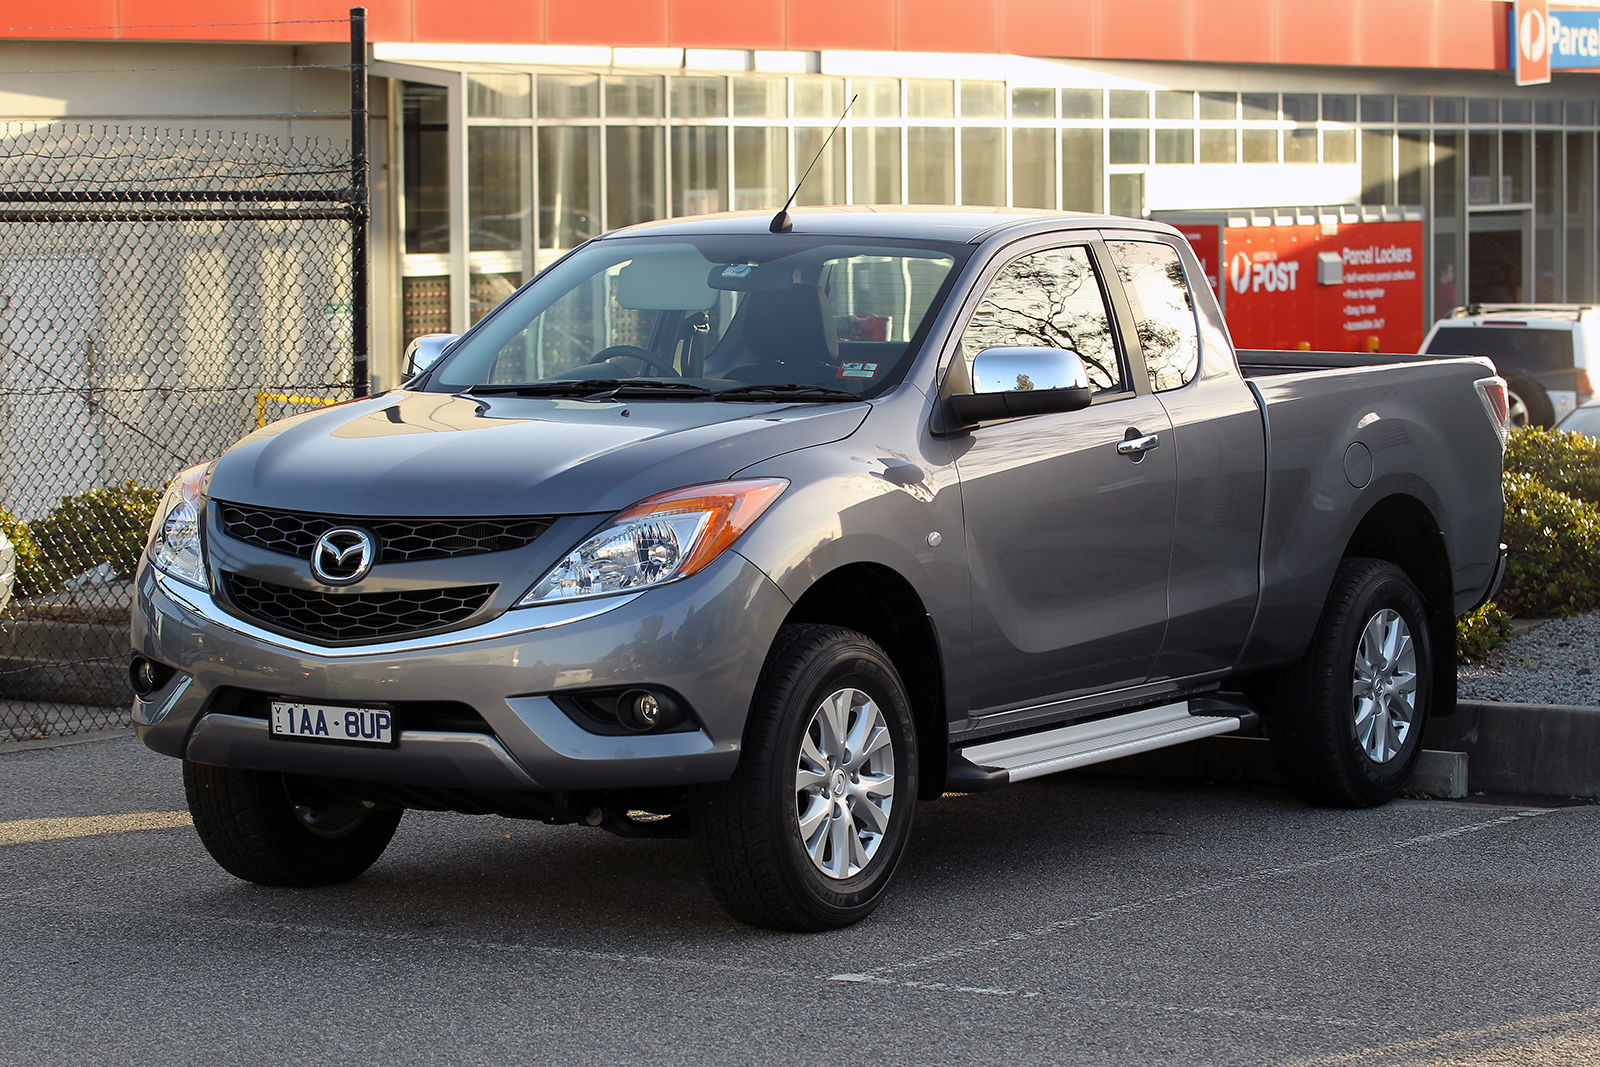 2015 Mazda BT-50 Freestyle Cab Review | CarAdvice